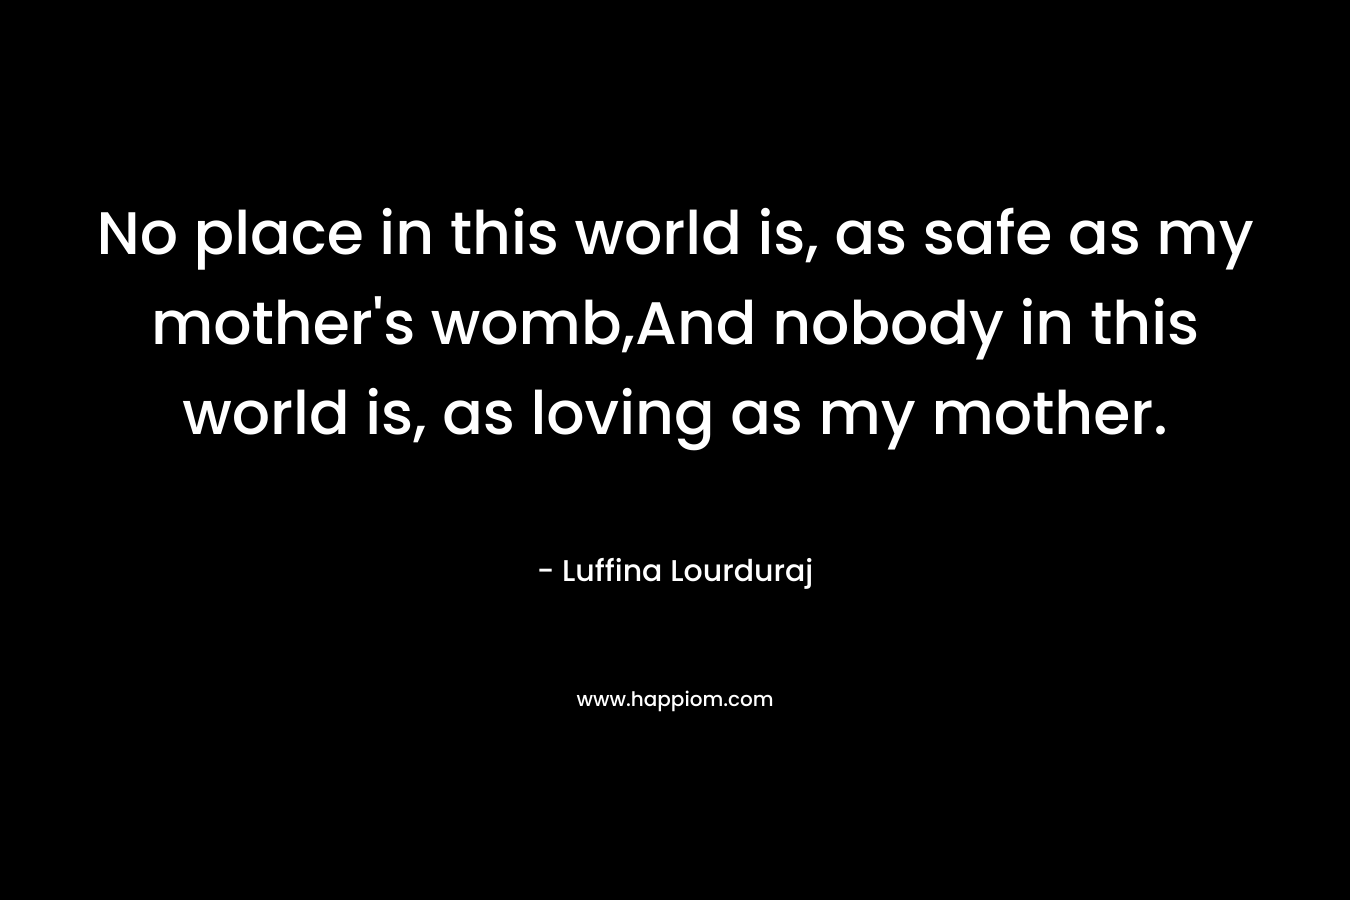 No place in this world is, as safe as my mother's womb,And nobody in this world is, as loving as my mother.